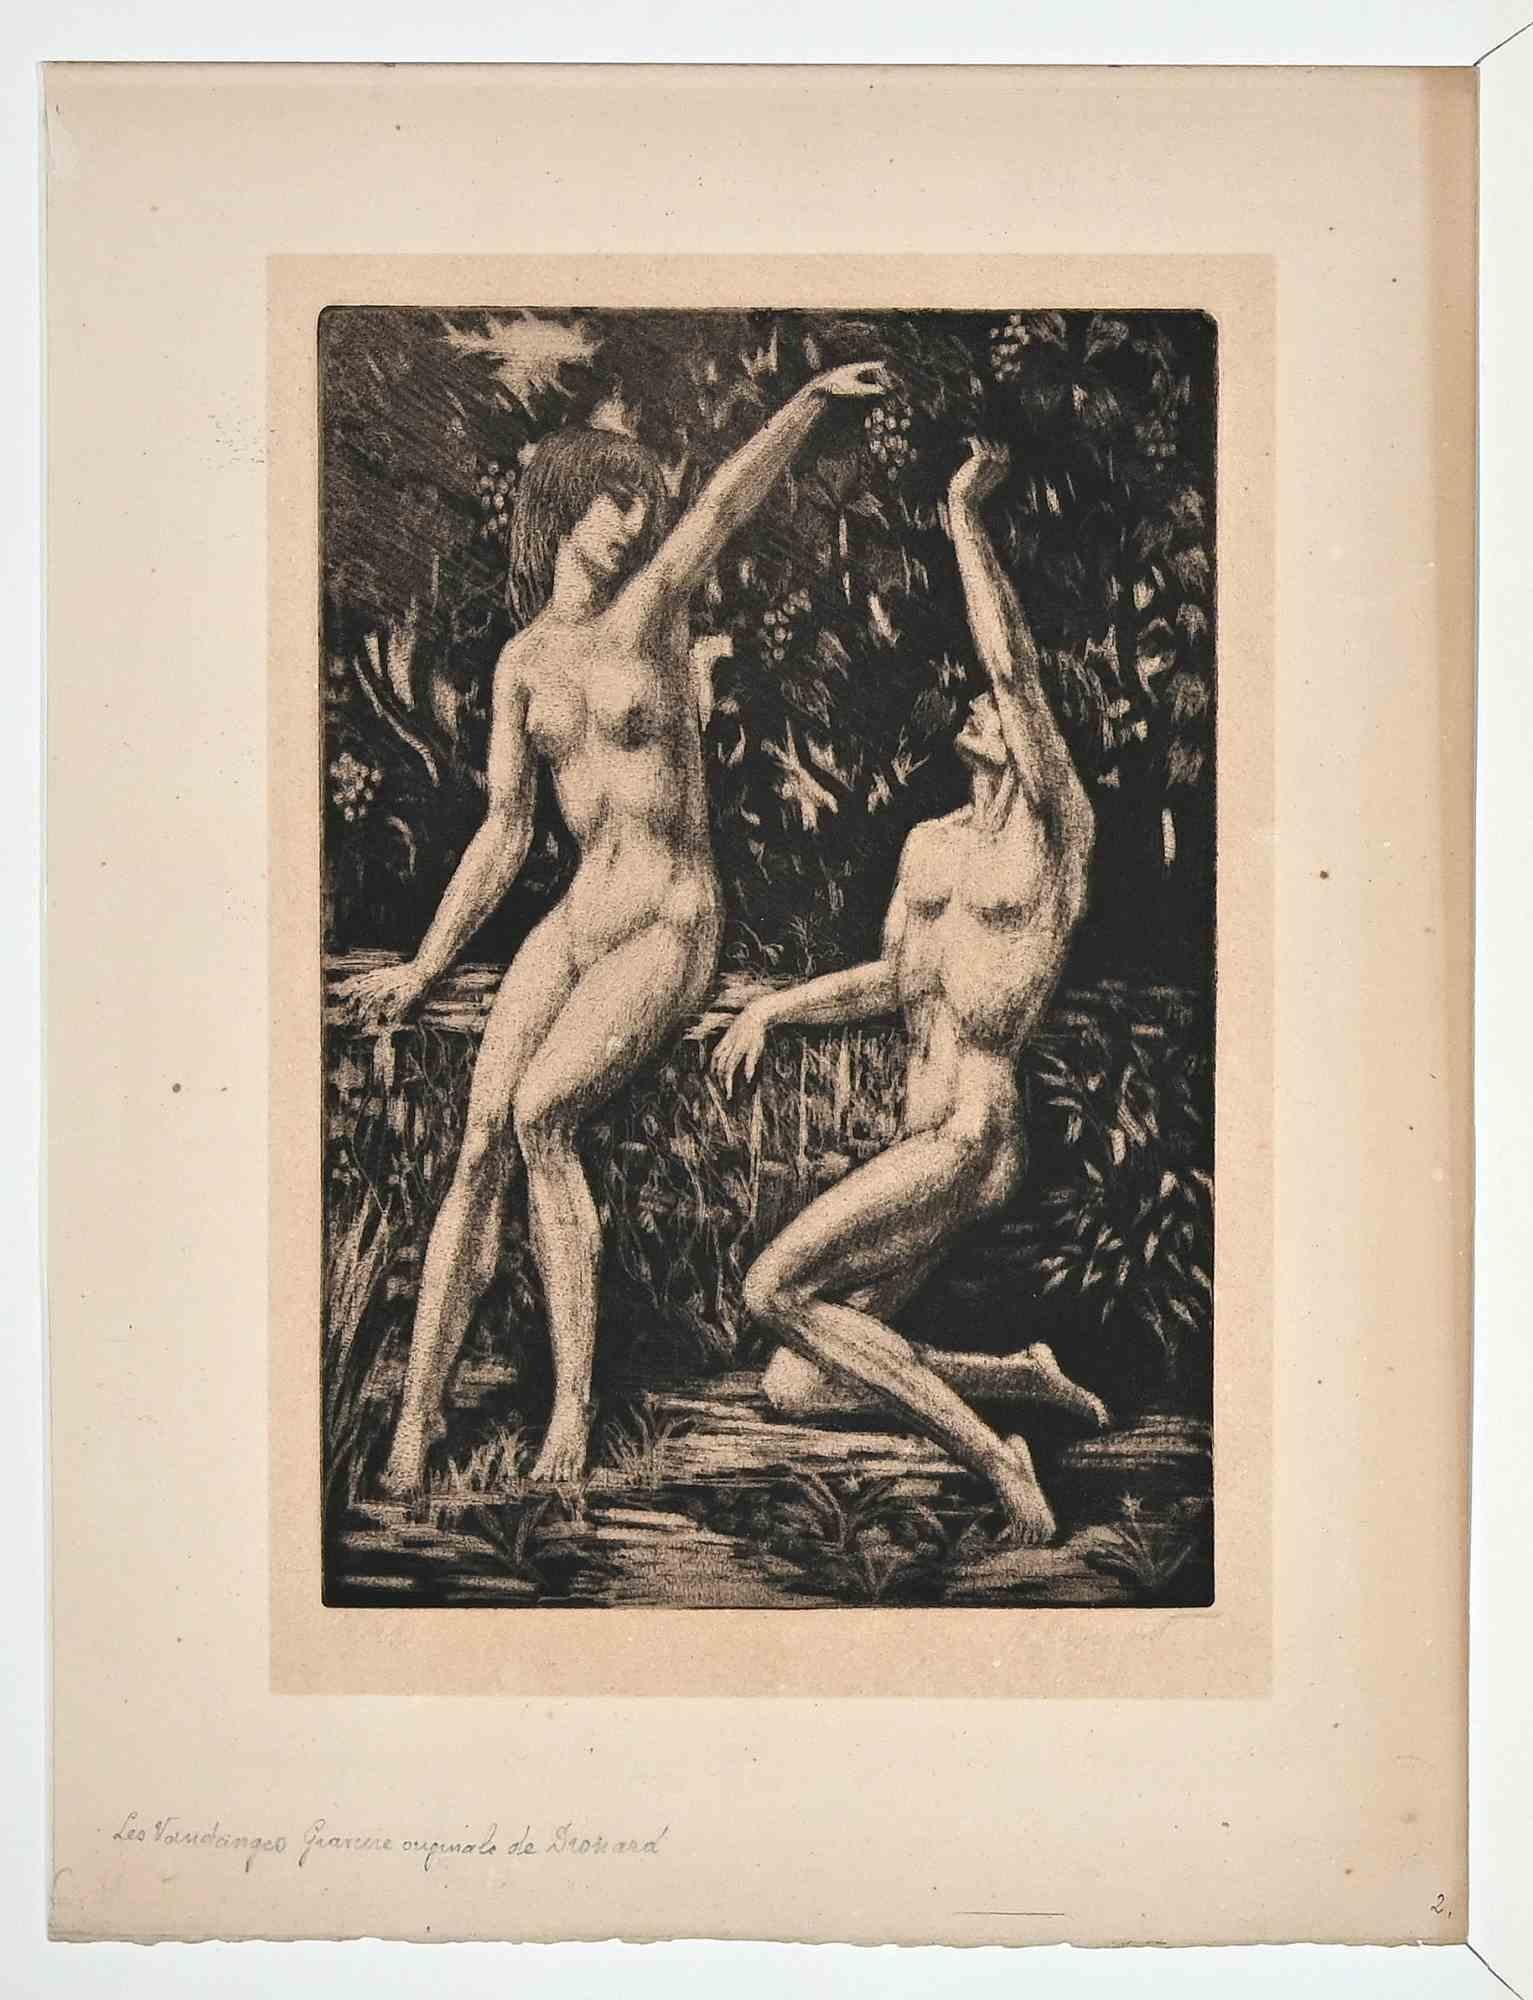 Dead Nudes - Original Etching by Raphael Drouart - Early 20th century